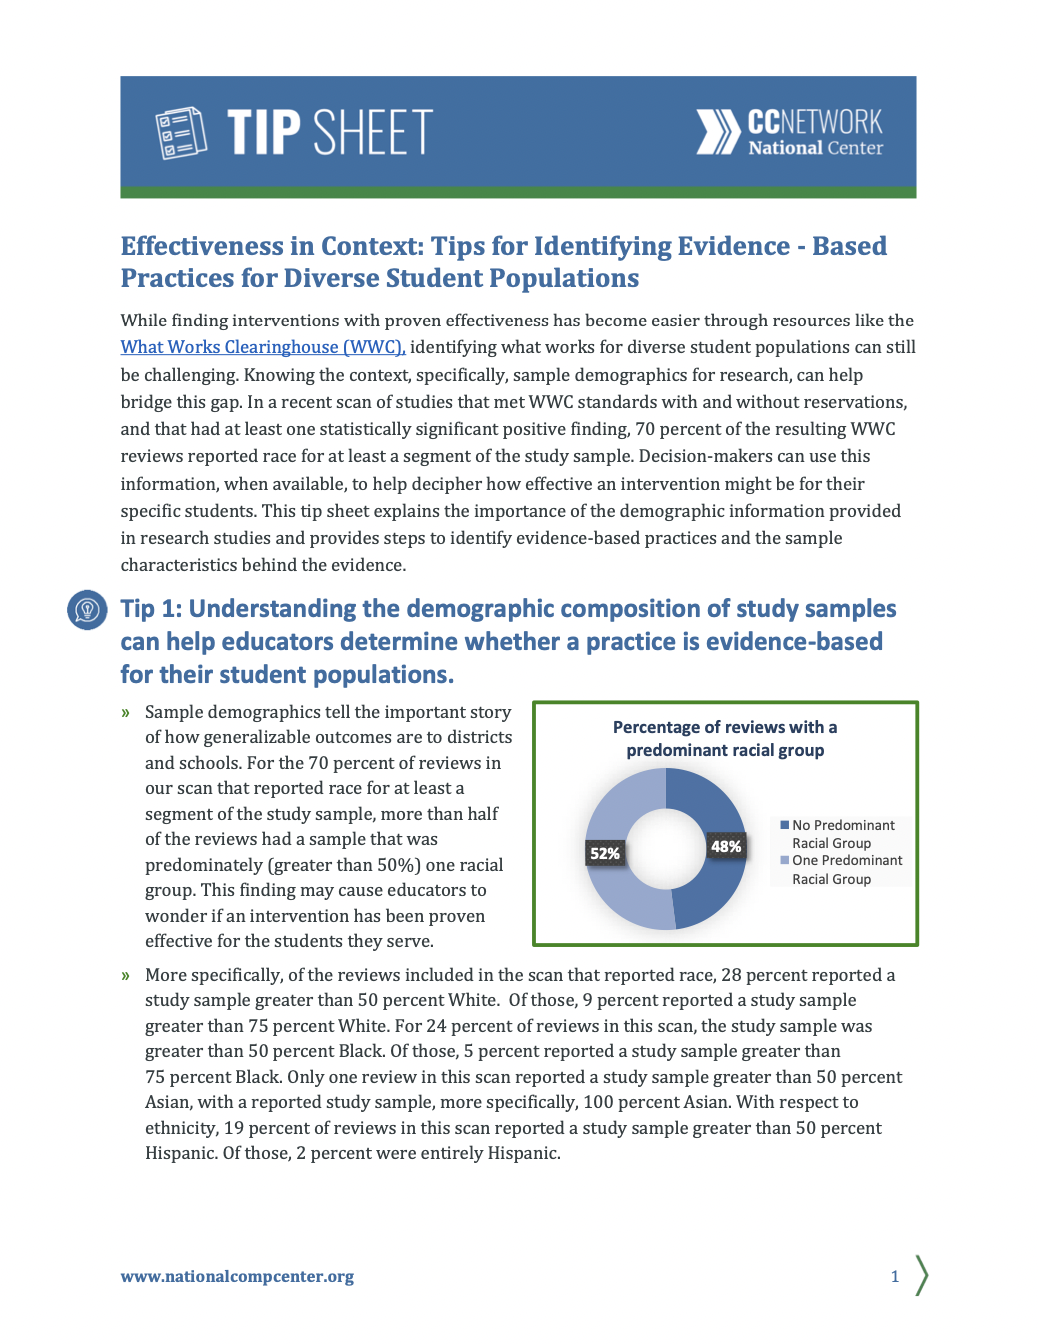 Effectiveness in Context_Tips for Identifying Evidence-Based Practices for Diverse Student Populations